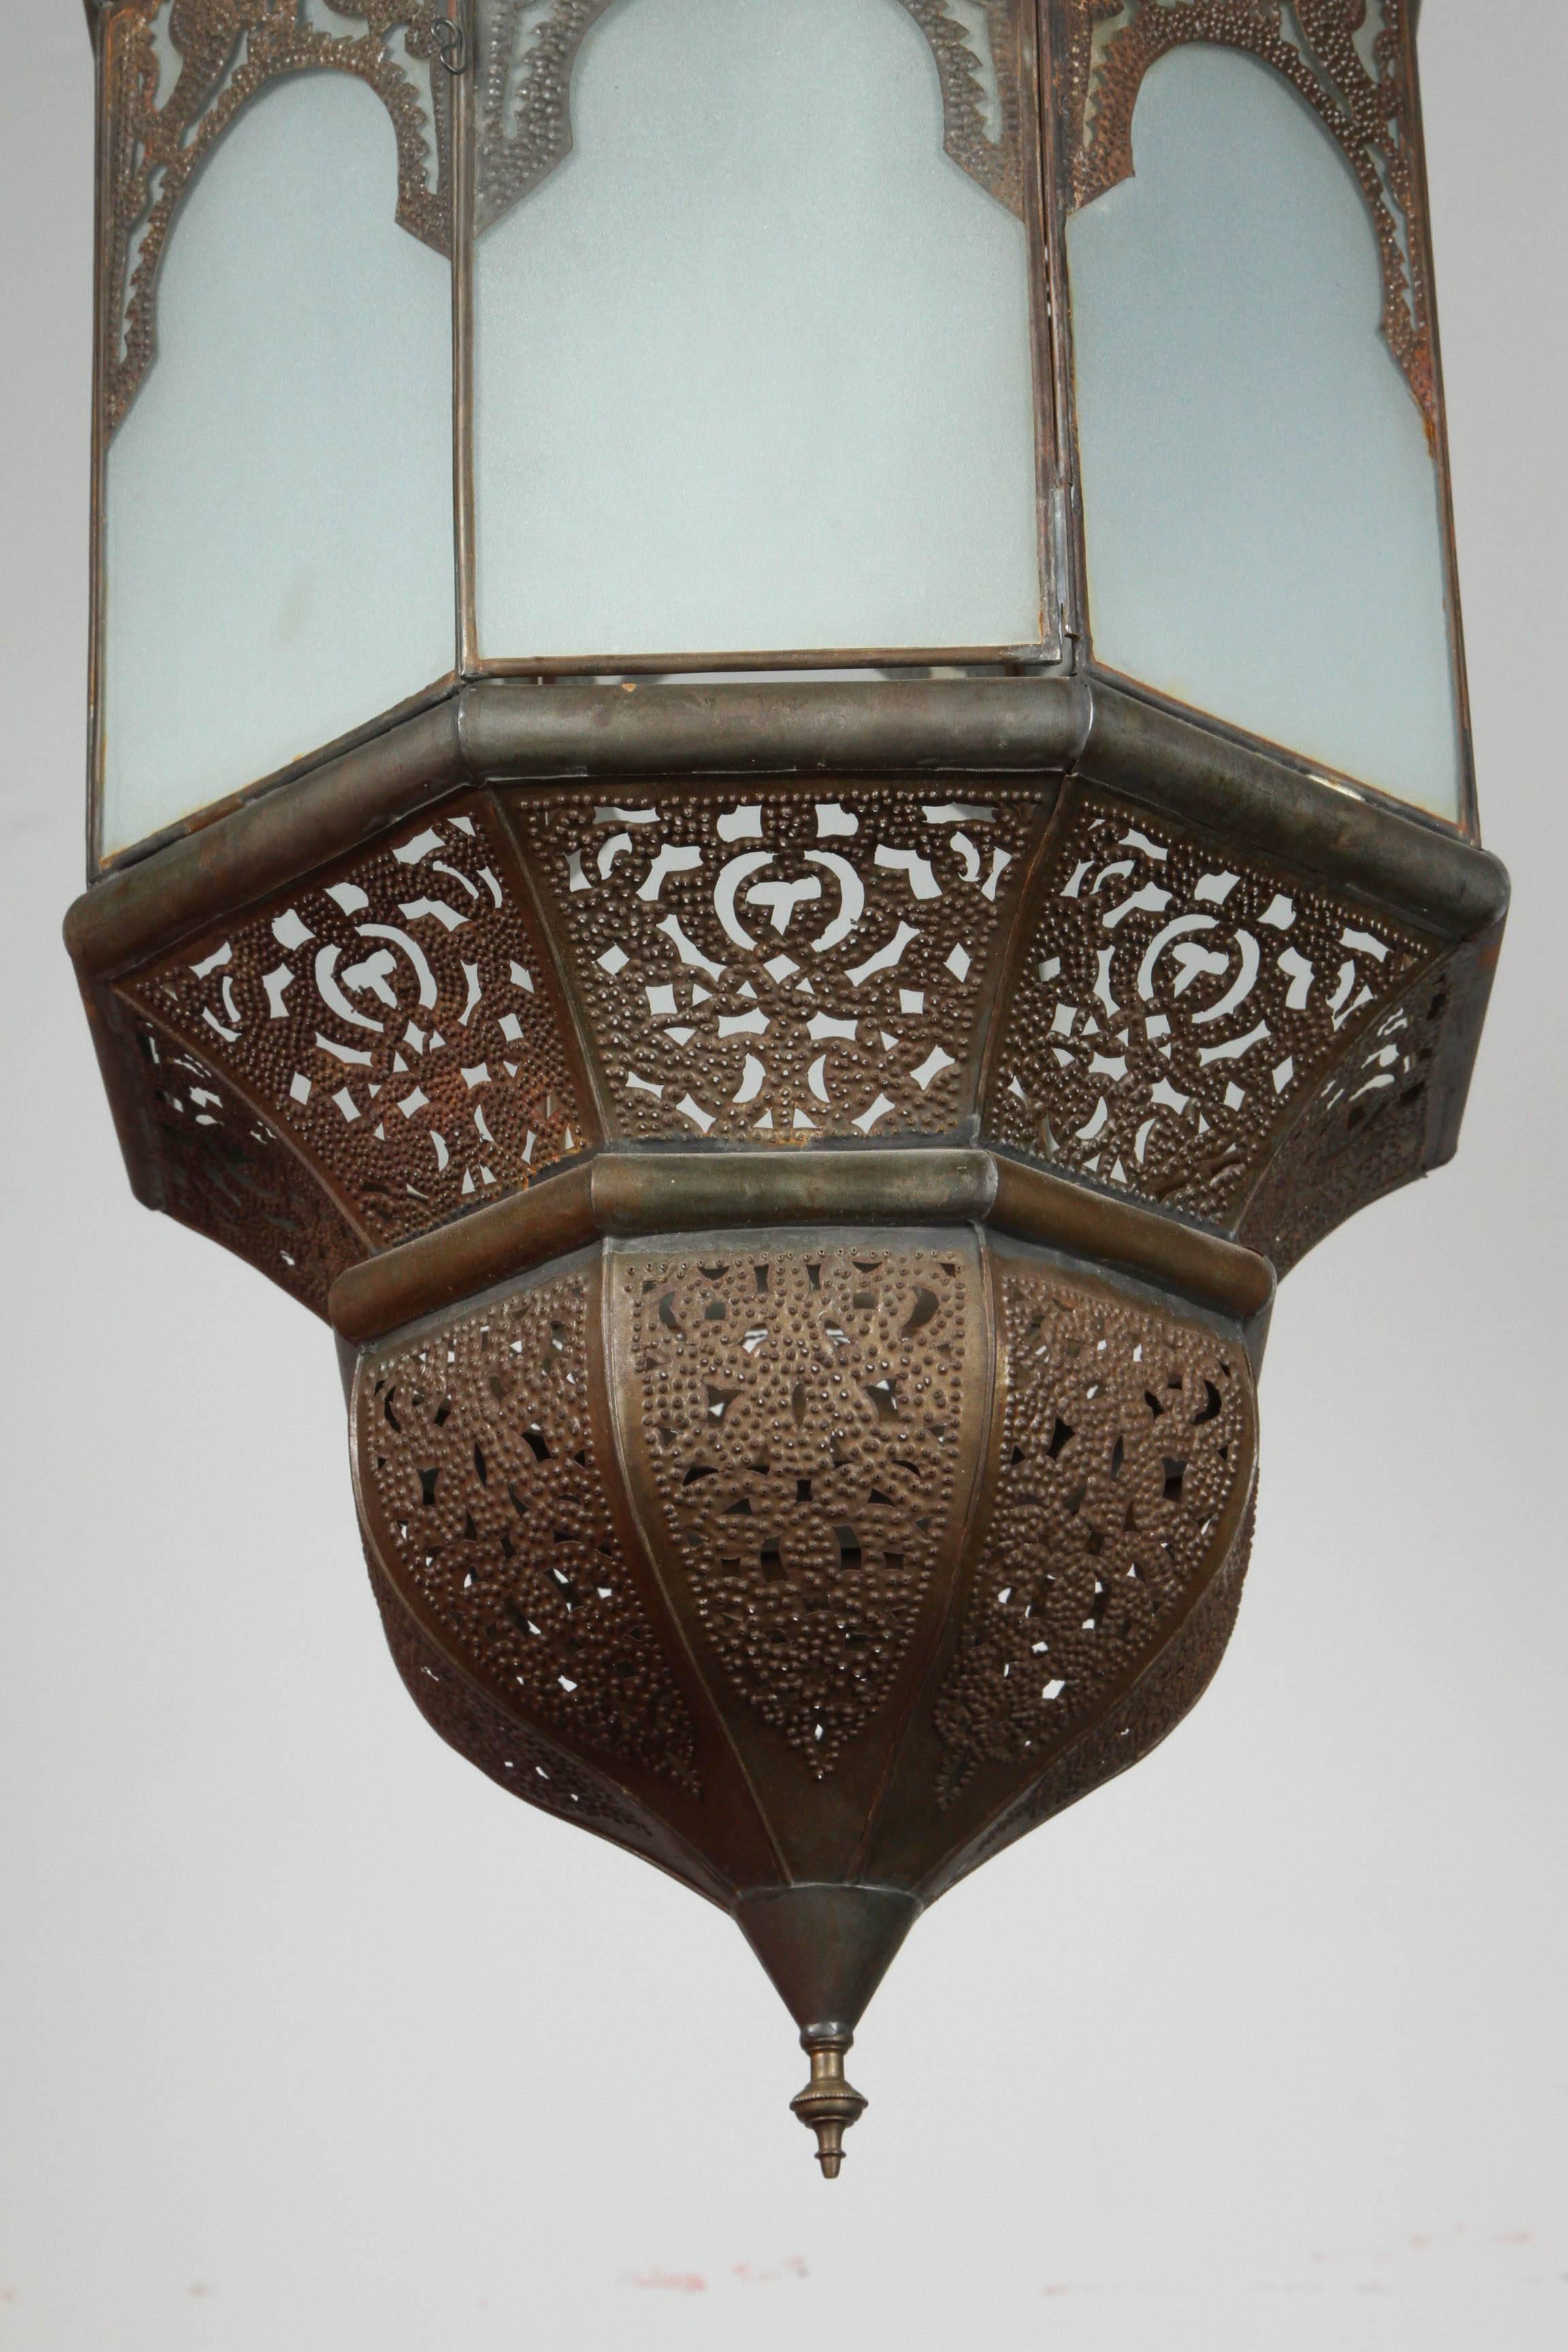 Moroccan Moorish hanging glass pendant from Marrakech with sandblasted glass in frosted milky glass with bronze color metal finish.
Rewired and has a small door on the side to change the light bulbs.
Handcrafted pendant by artisans in Morocco.
Body